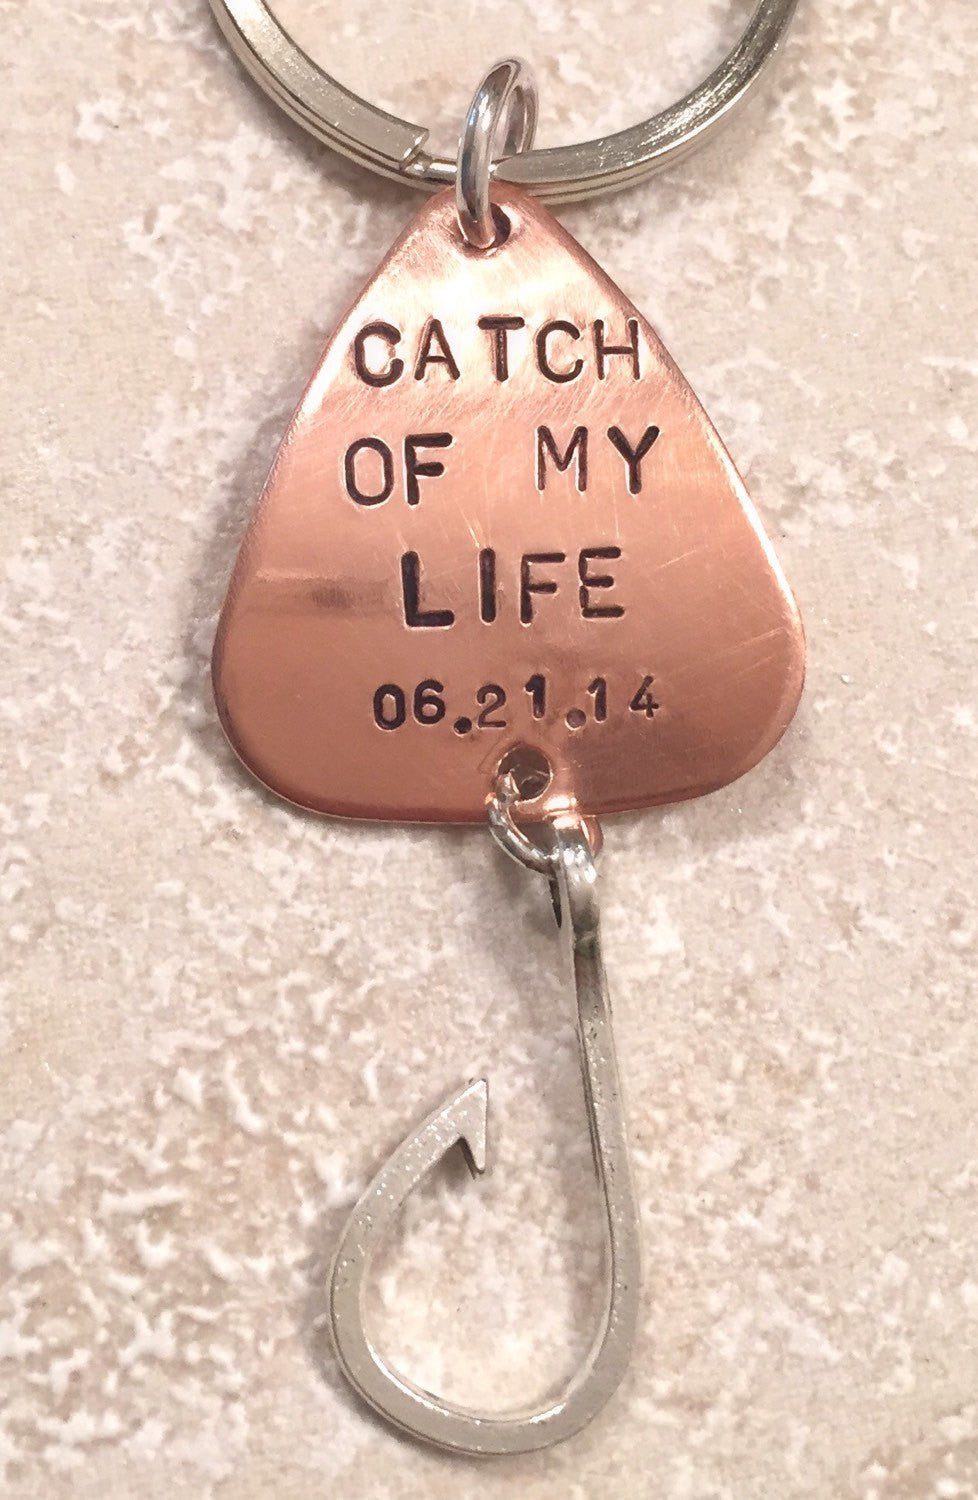 Fishing Lure Keychain, Personalized - Natashaaloha, jewelry, bracelets, necklace, keychains, fishing lures, gifts for men, charms, personalized, 